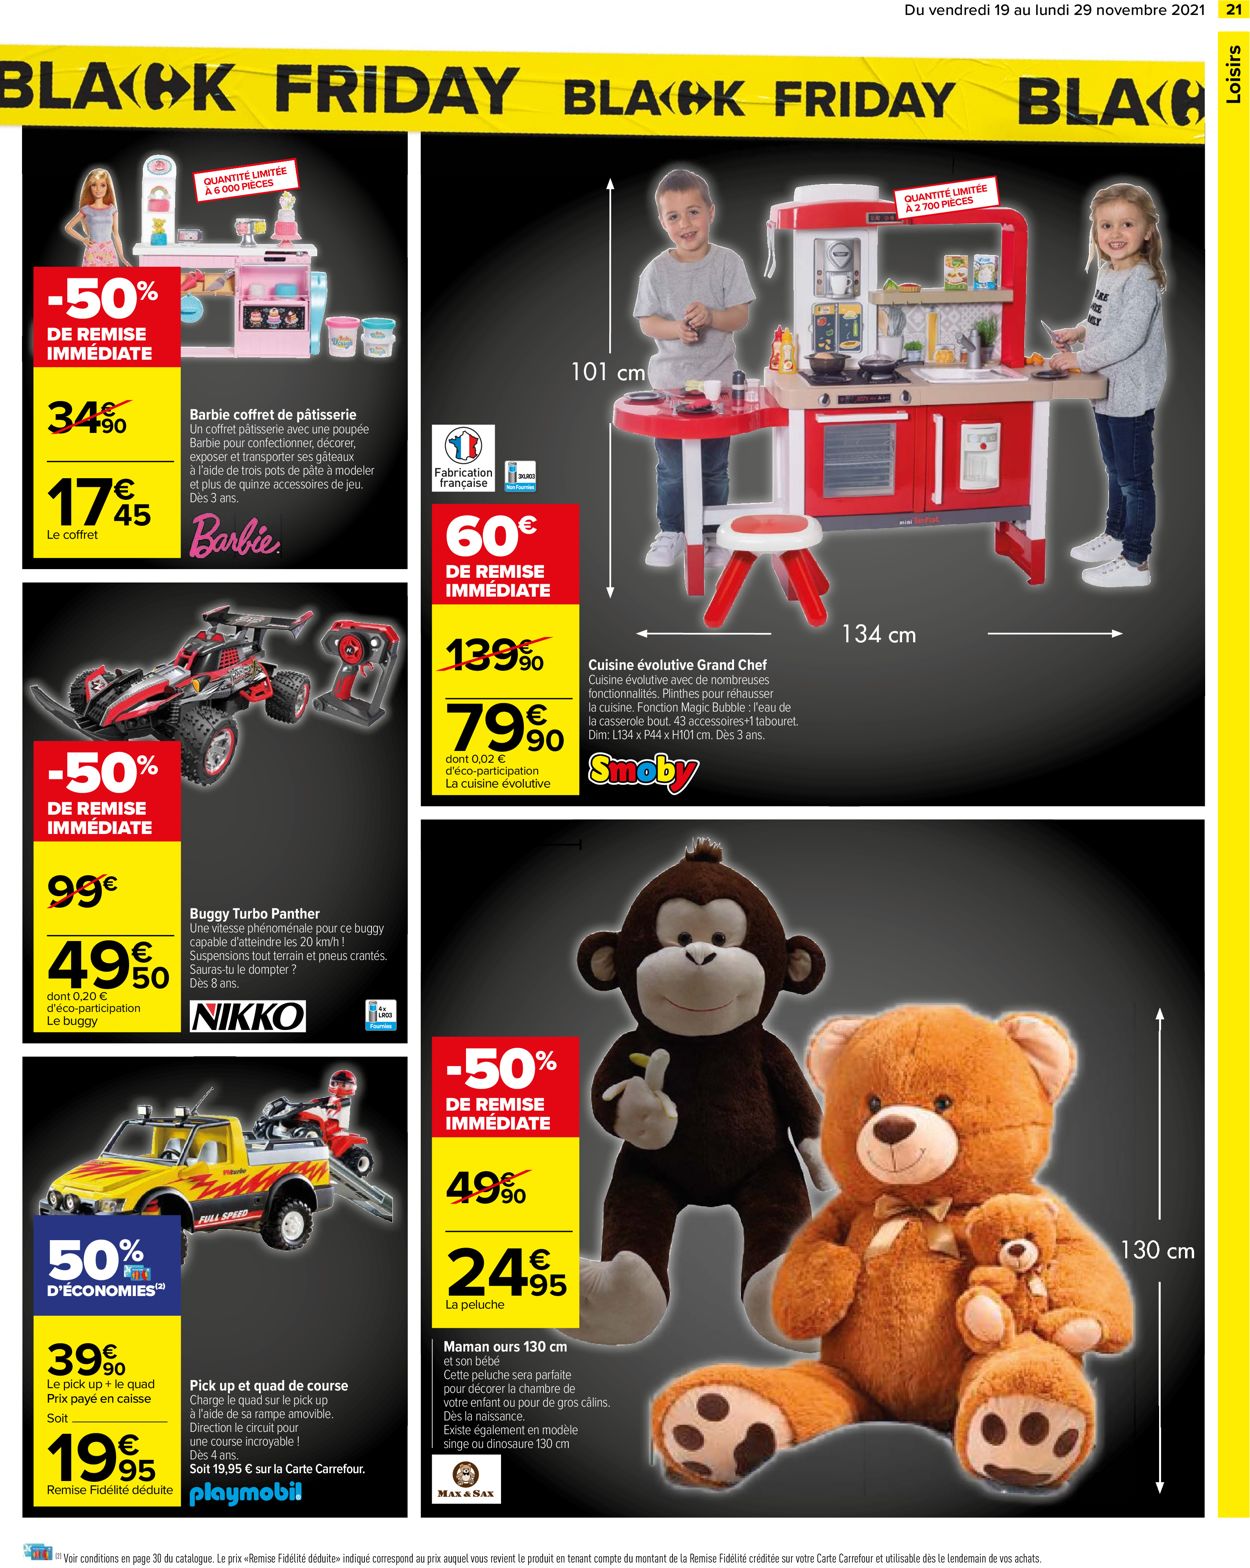 Carrefour BLACK WEEK 2021 Catalogue - 19.11-29.11.2021 (Page 21)